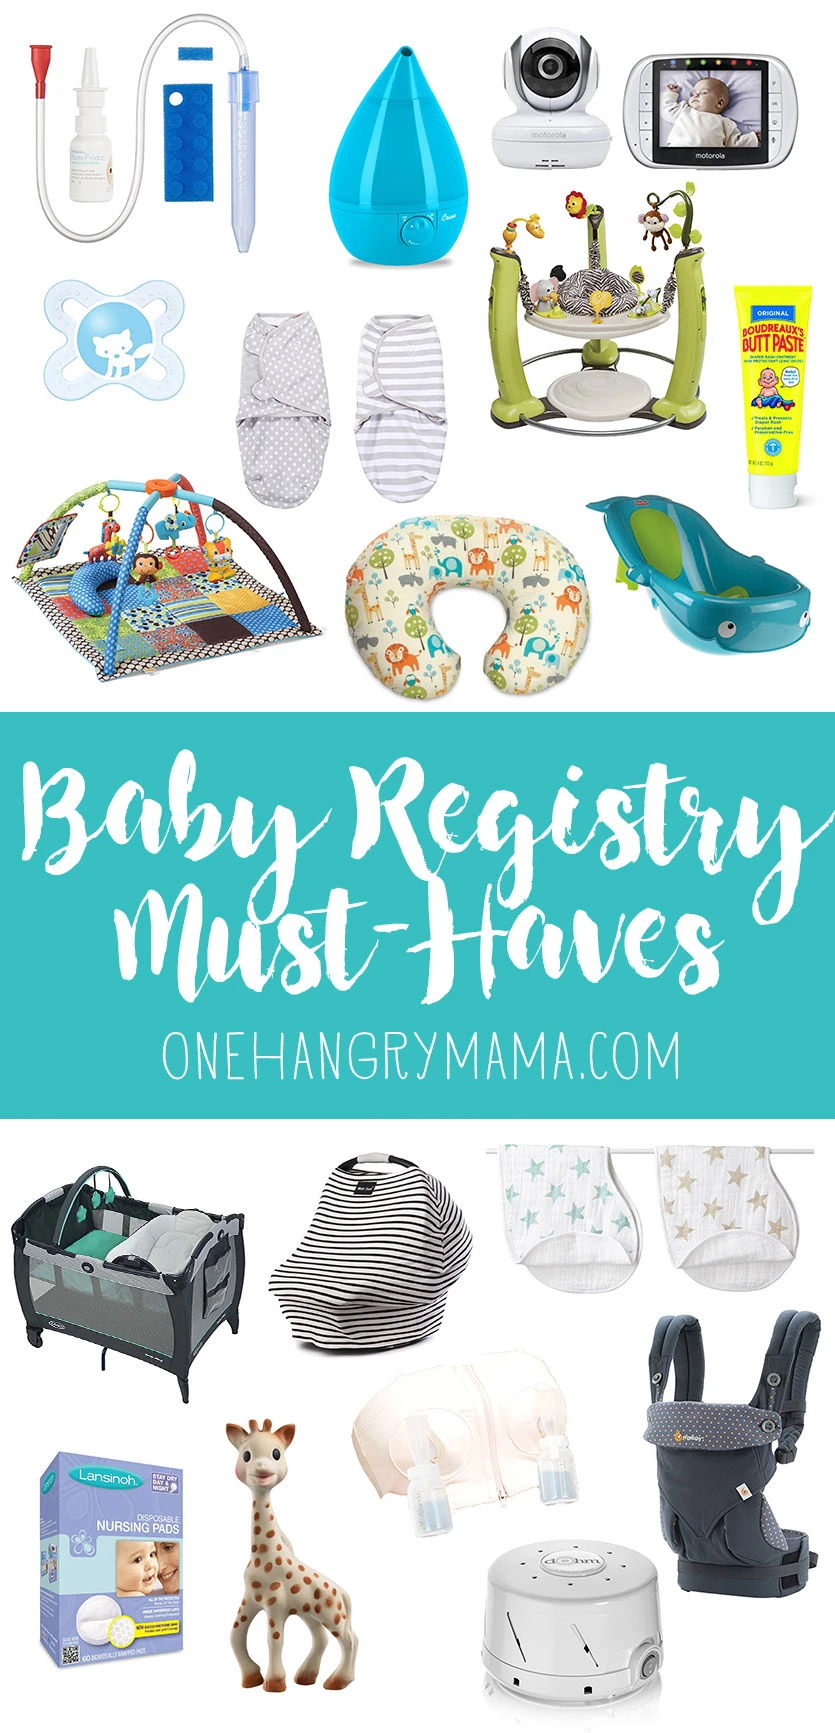 All the real must-haves for your baby registry from One Hangry Mama